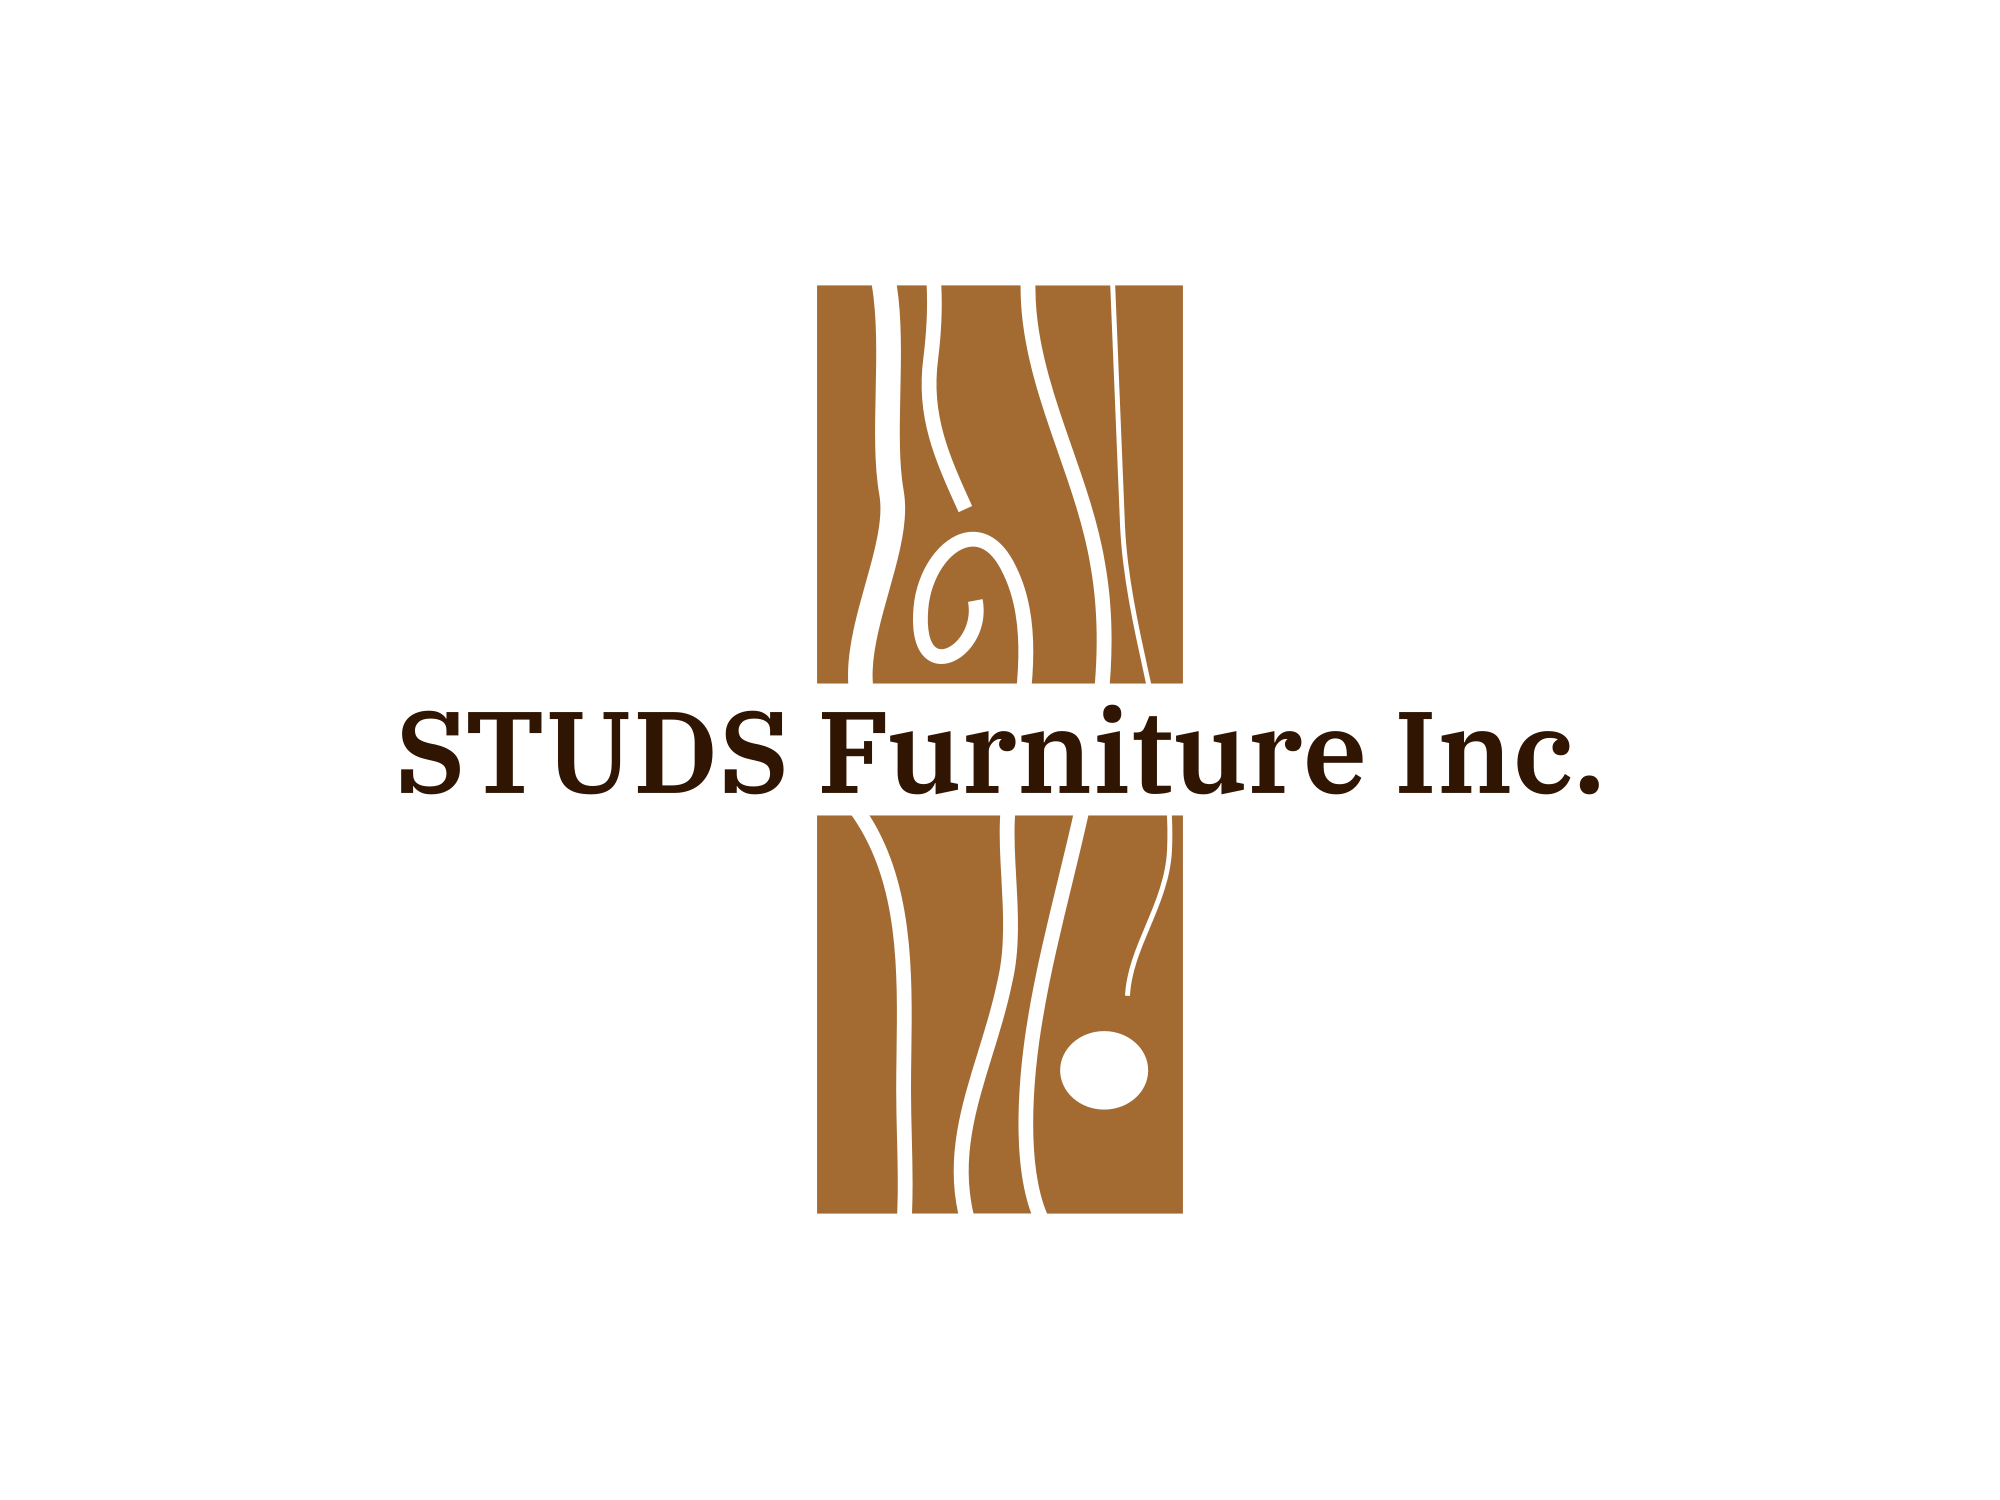 Crafted Comfort: Muskoka Chairs by Stud's Furniture